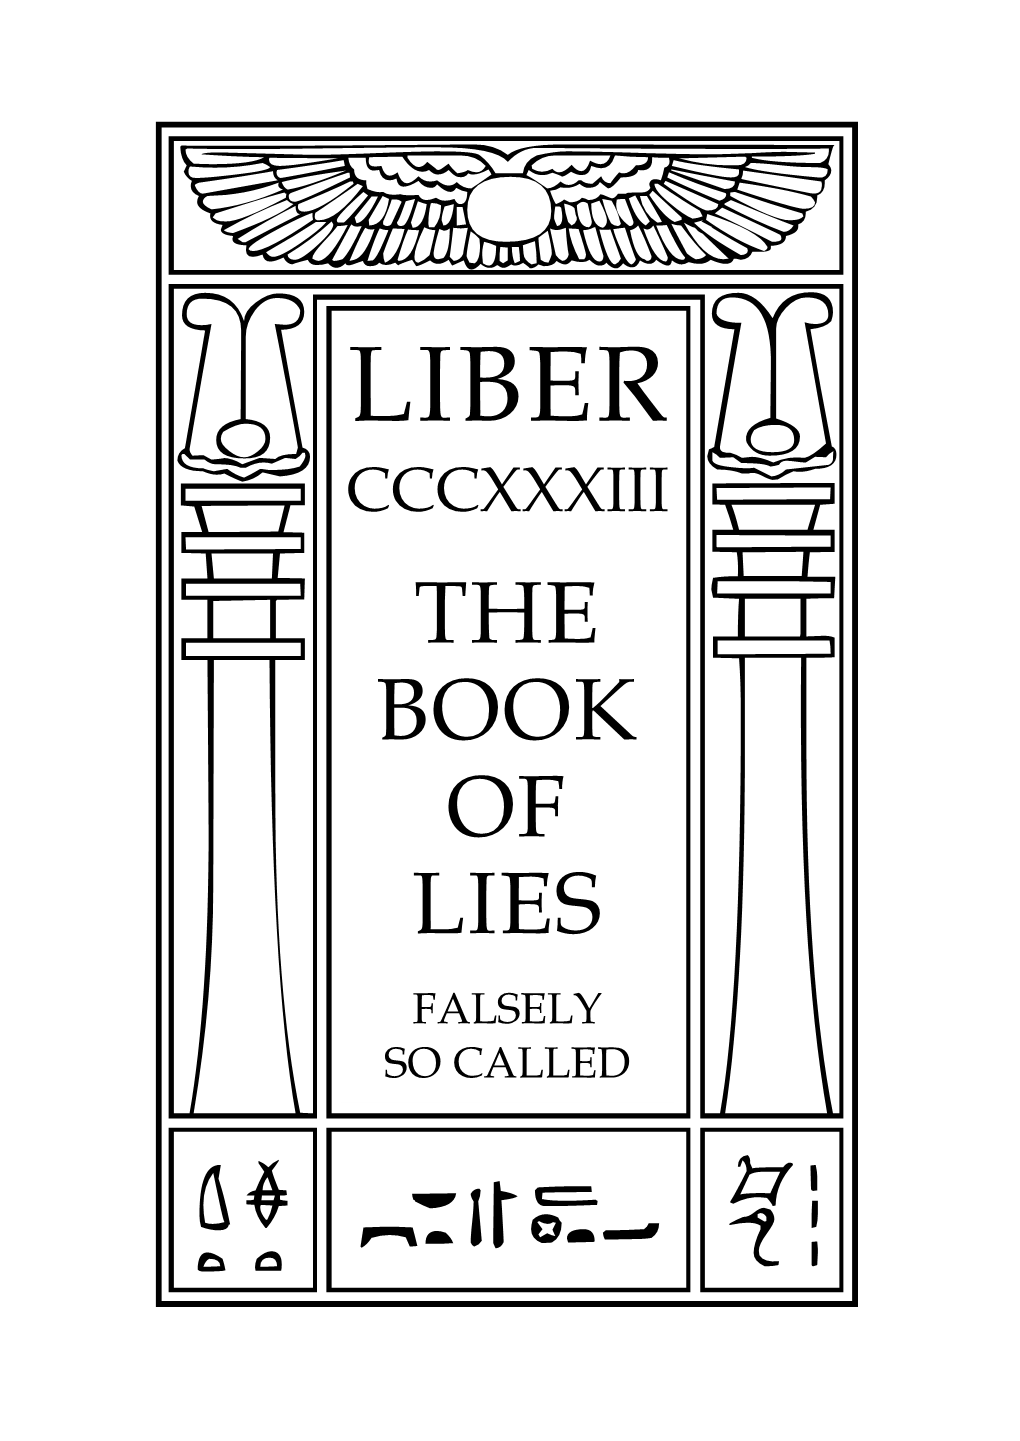 Liber 333: the Book of Lies, Falsely-So-Called